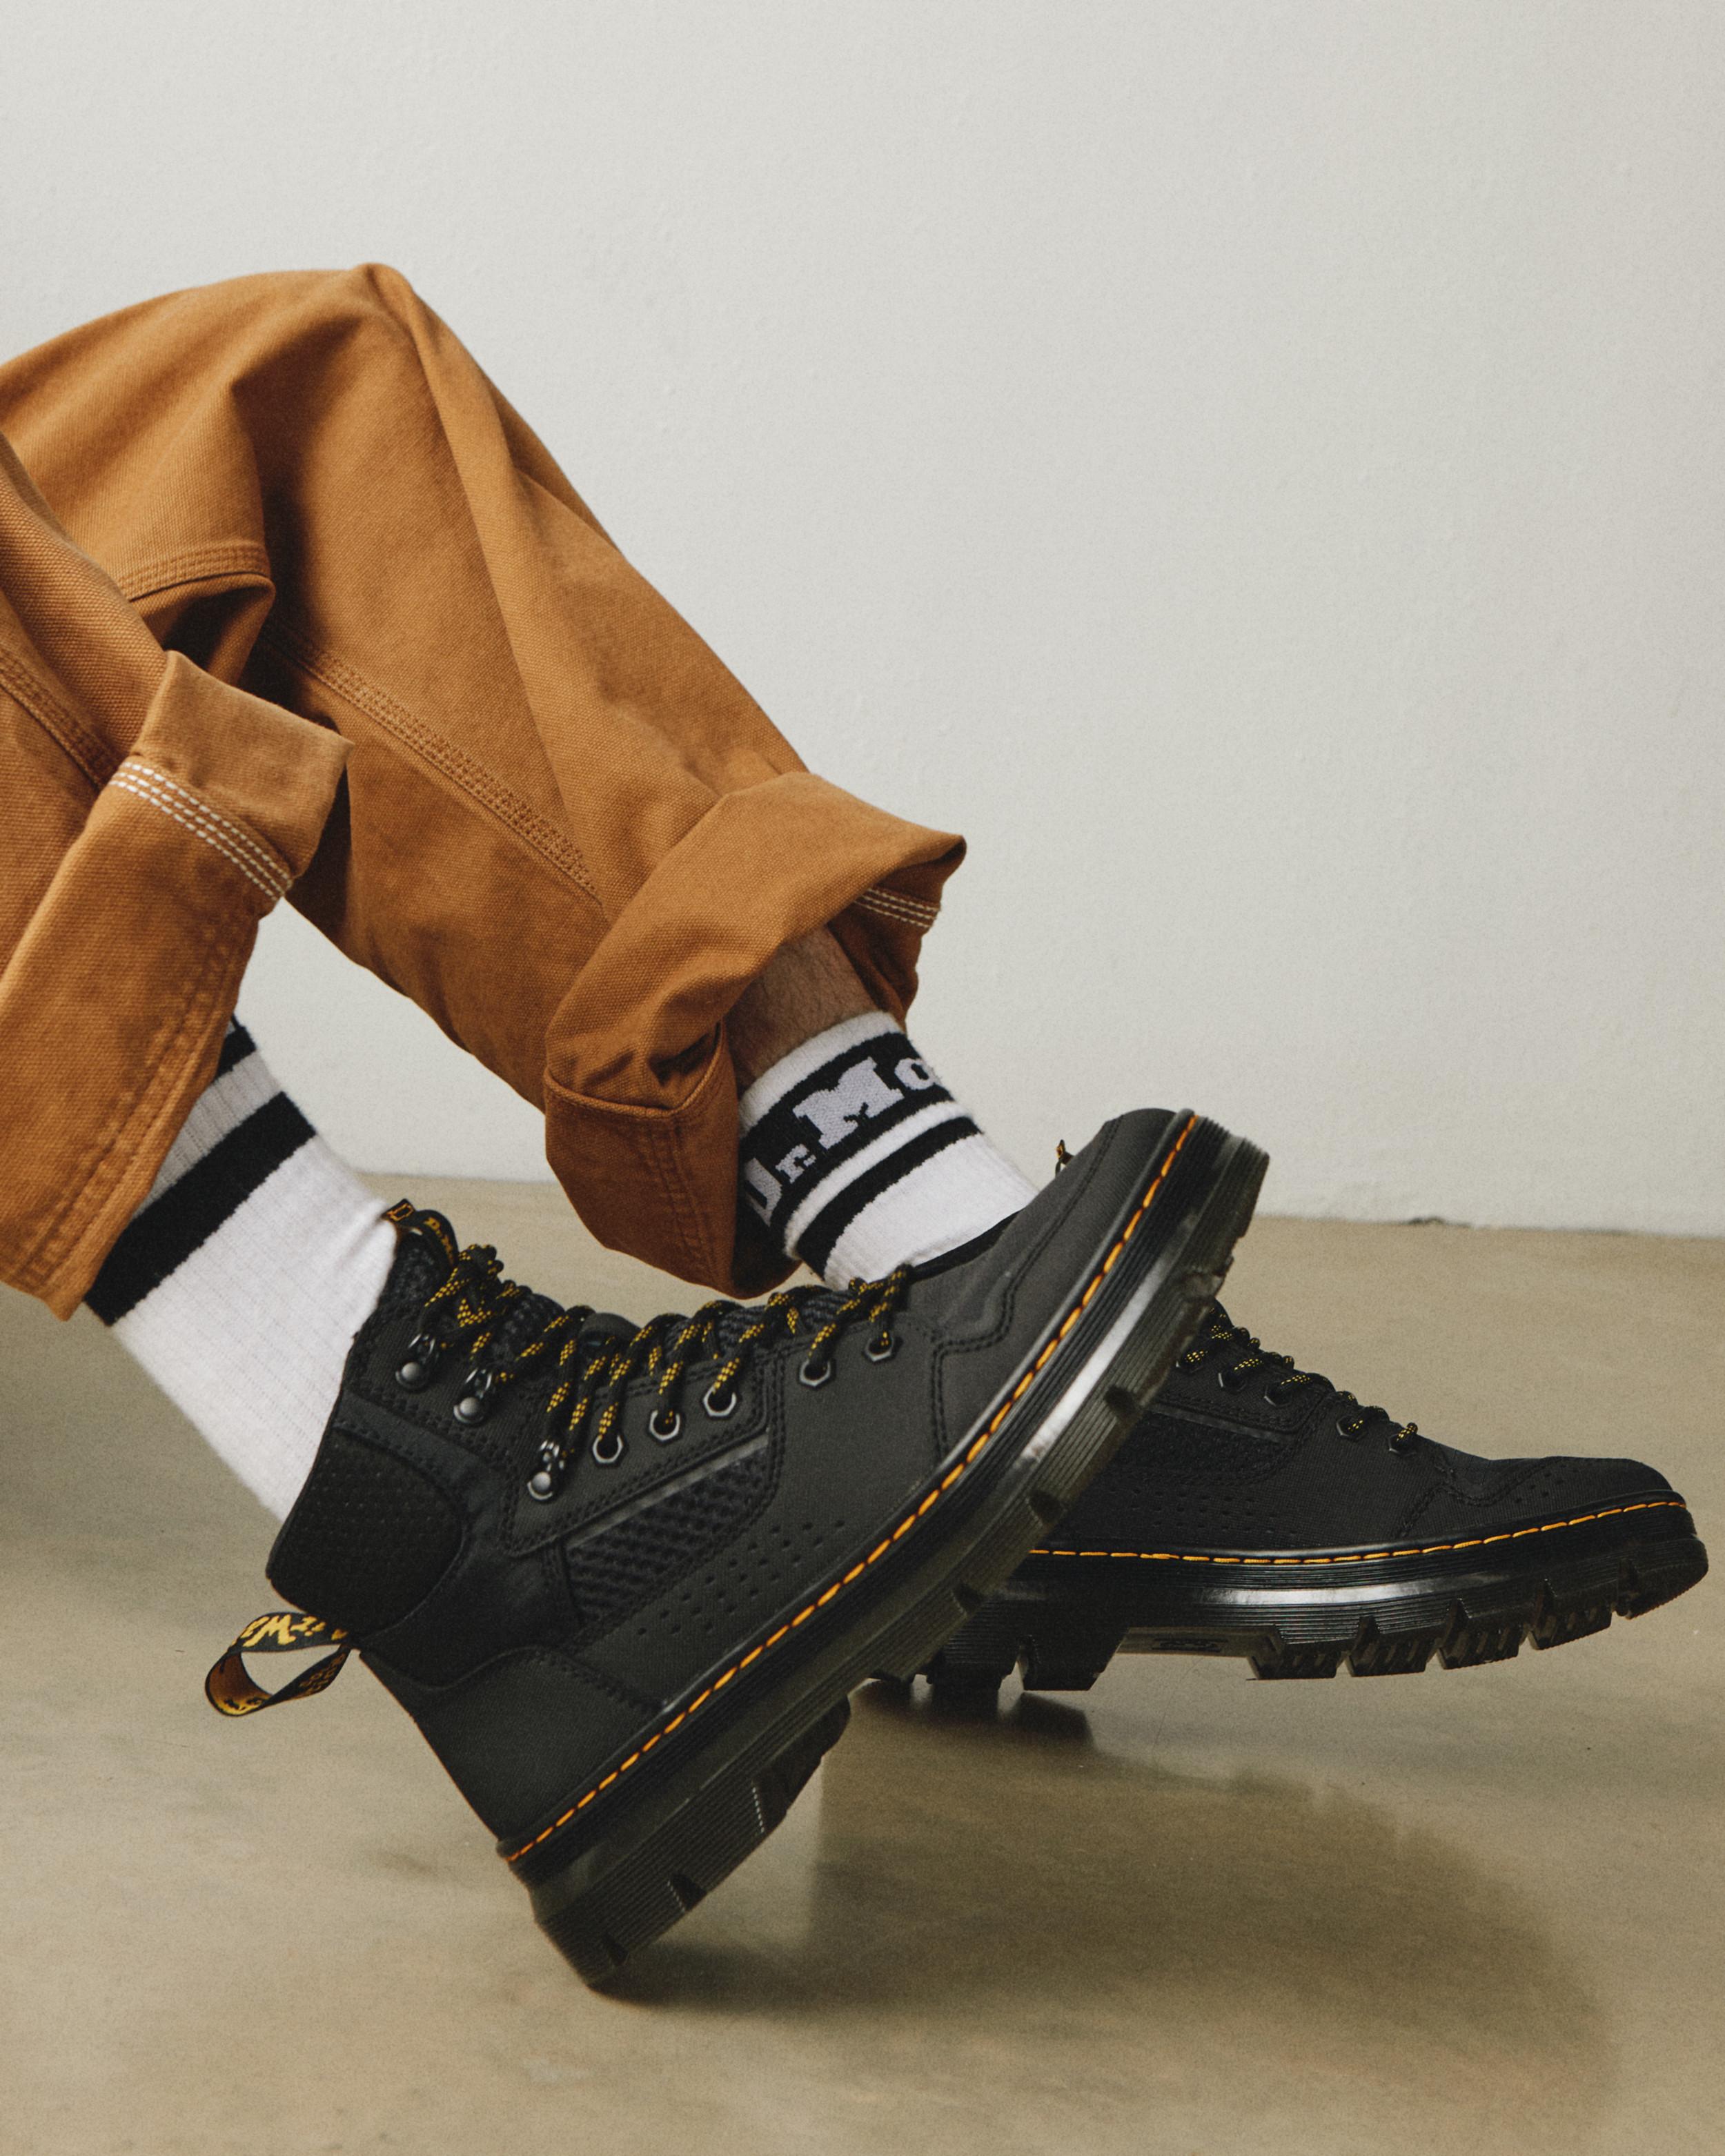 Rilla Lace Up Utility Boots in Black